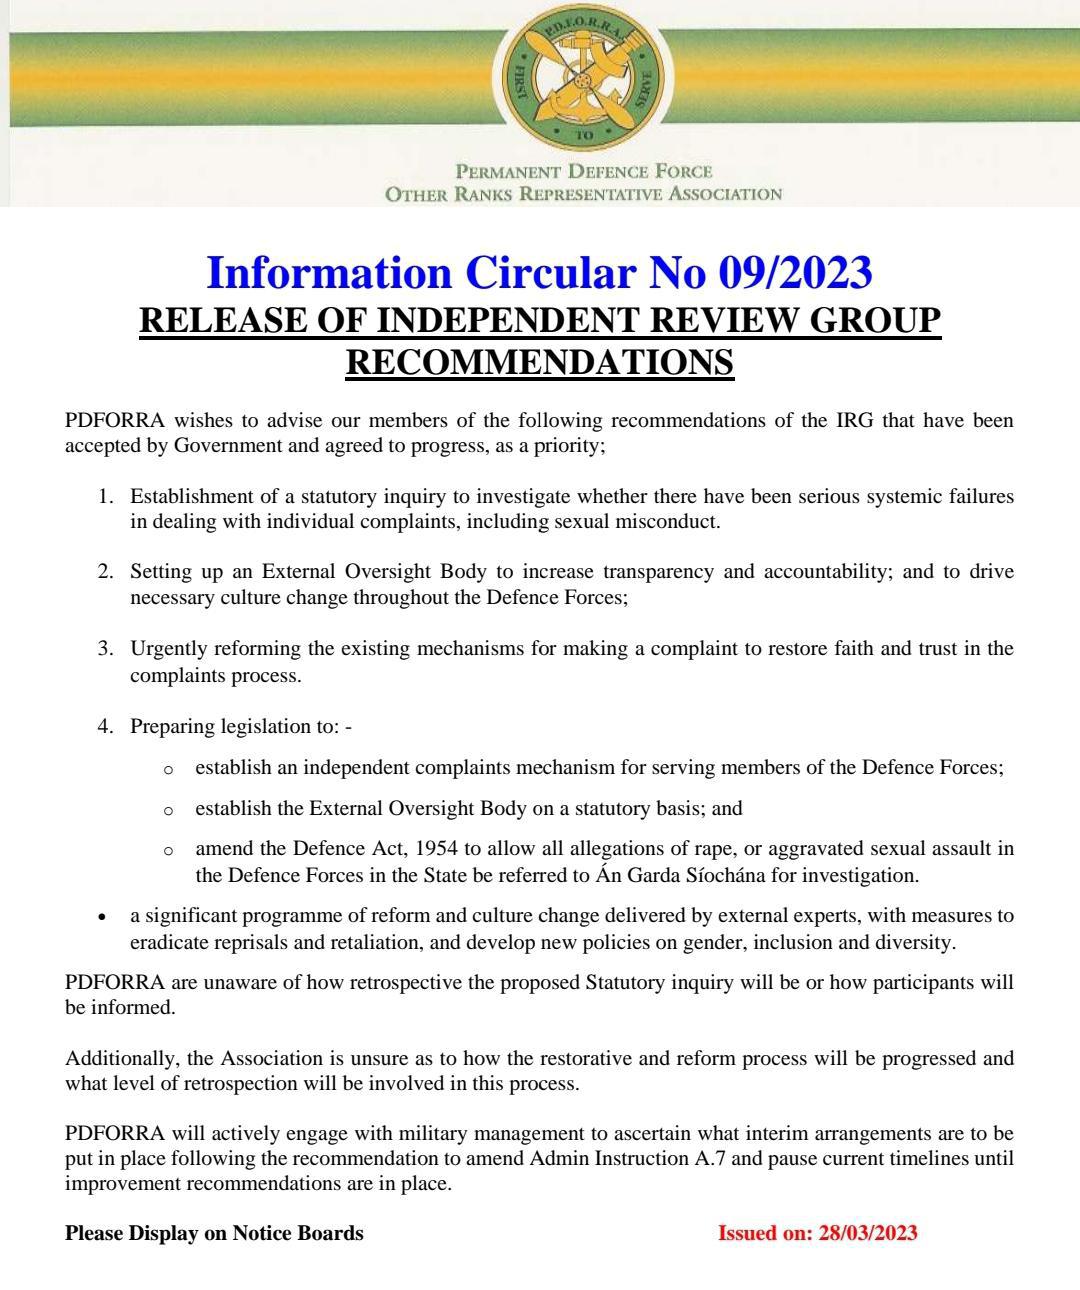 Information Circular No 09 of 23 - Release of IRG Report - Recommendations